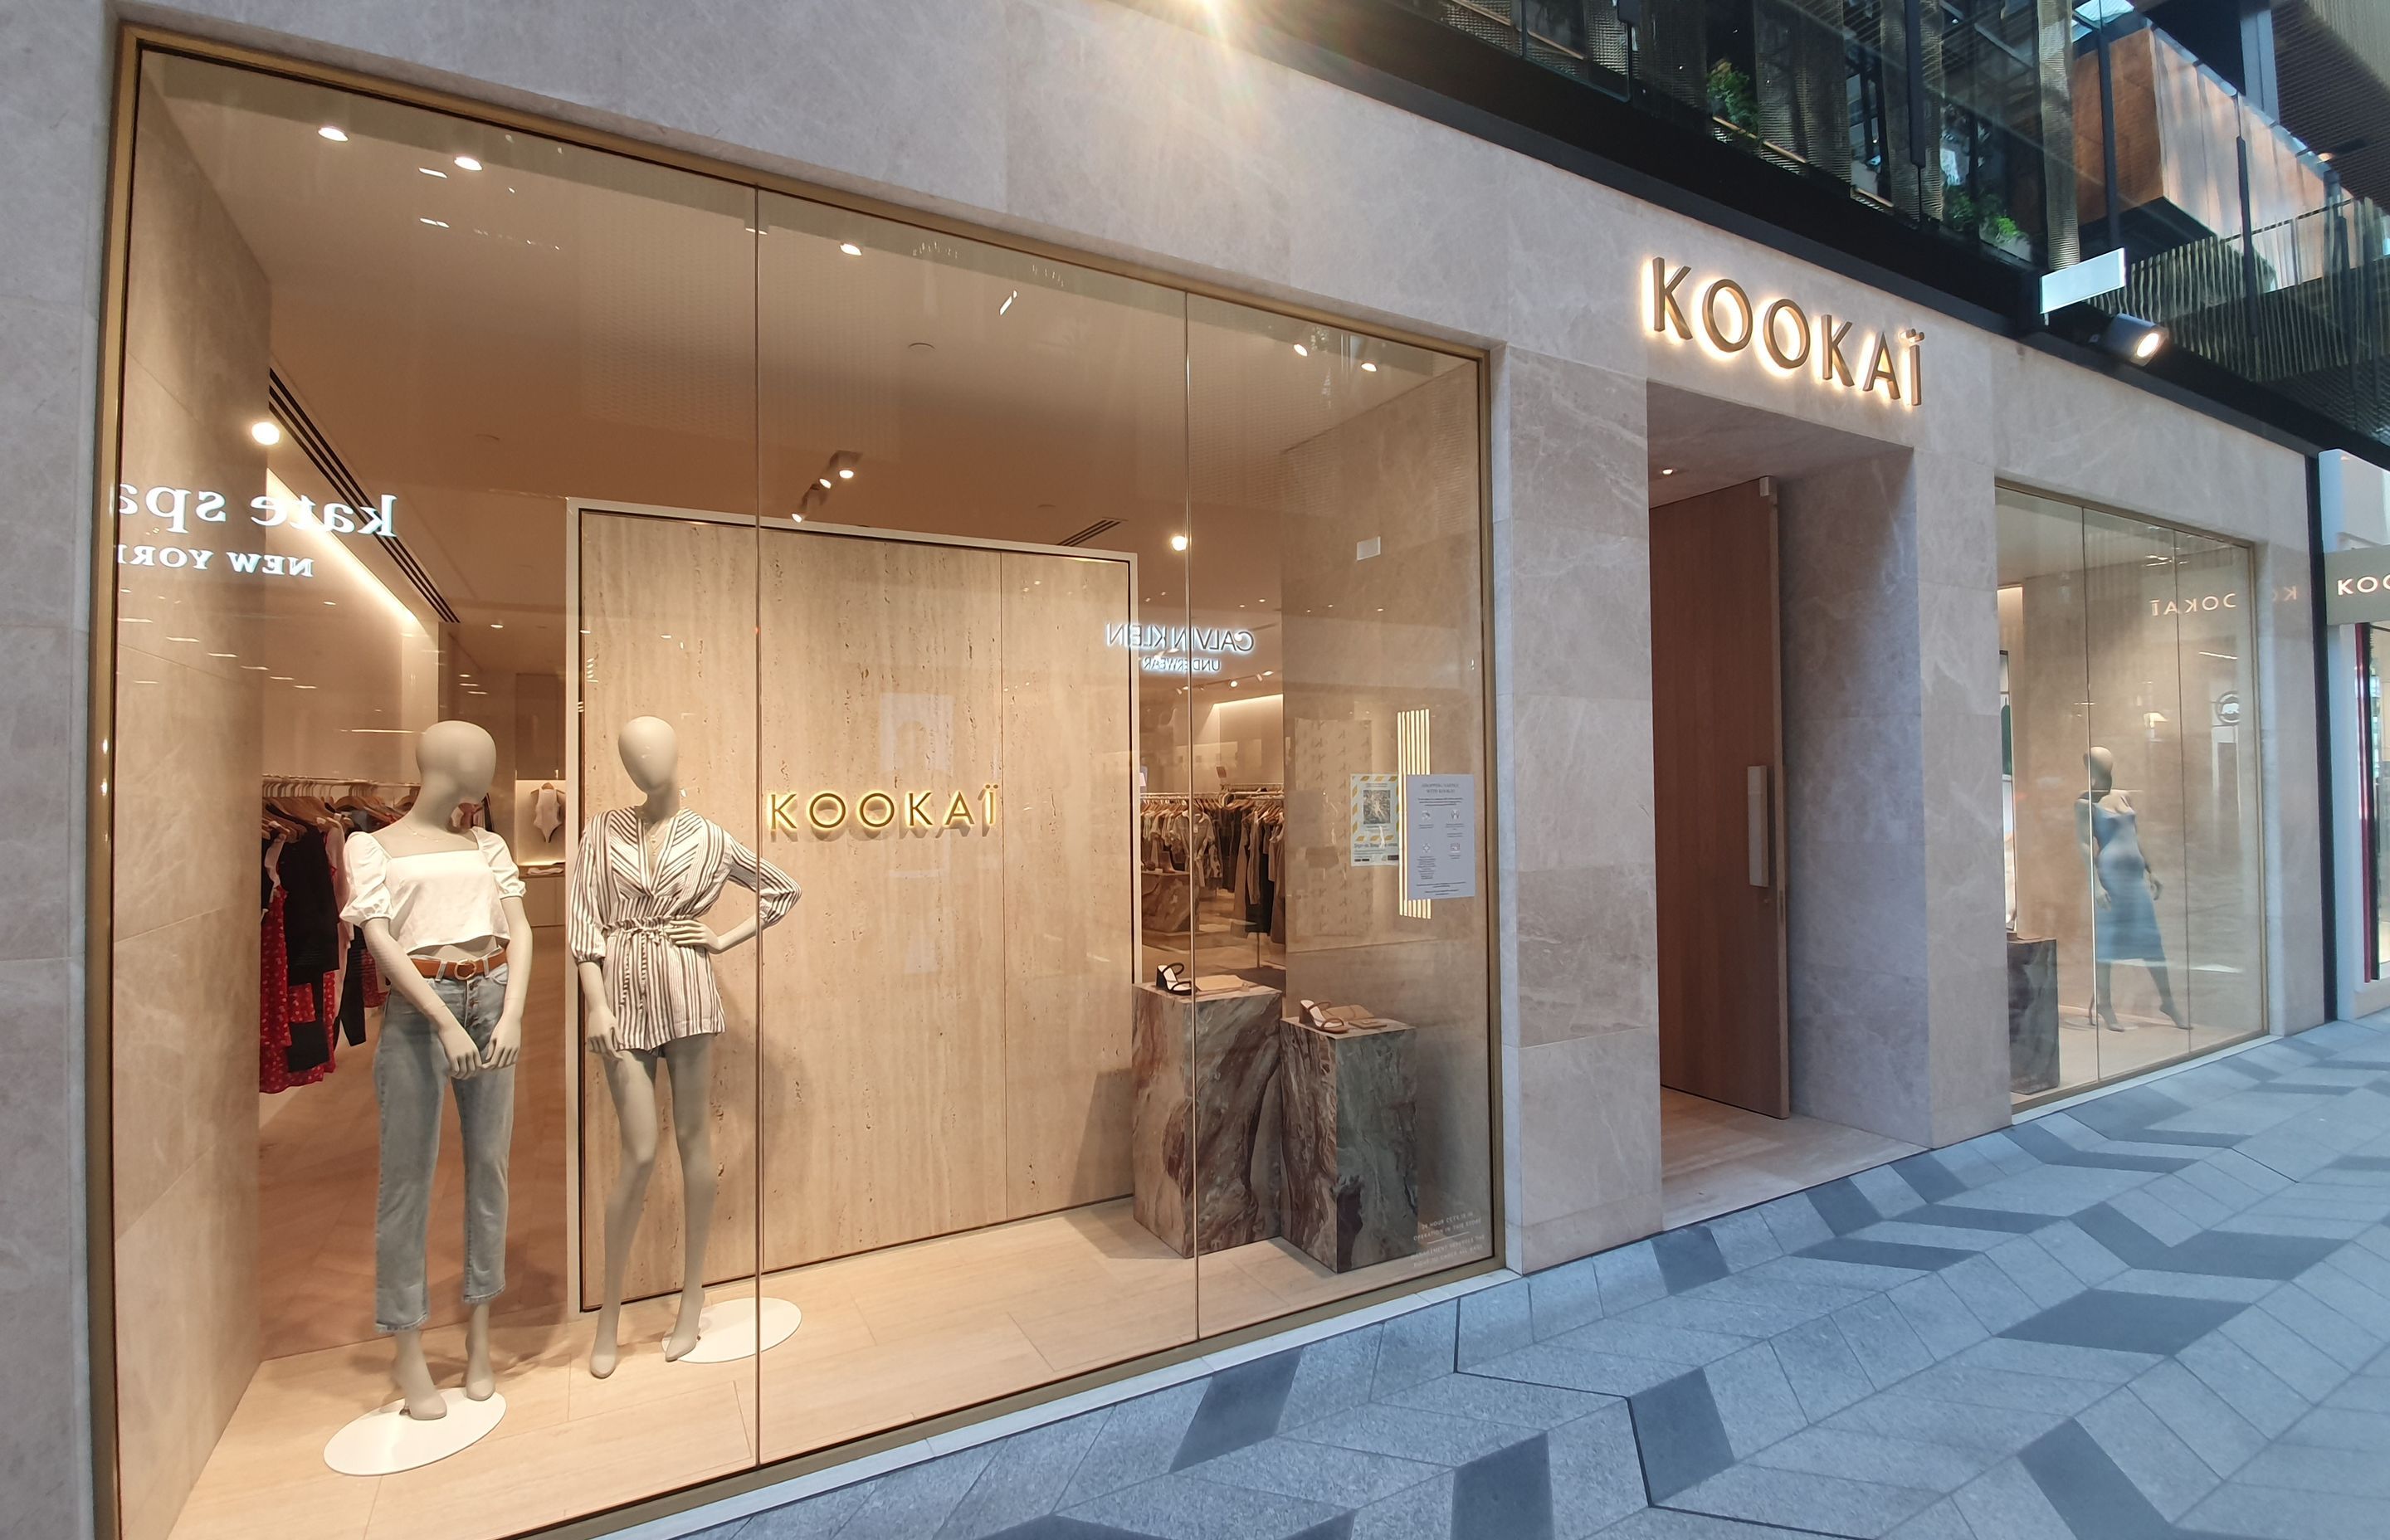 For Australian fashion brand Kookai's new flagship store in Auckland's Commercial Bay development, Haynes Glass specified and installed low-iron glass for the clearest visibility and true-colour representation.